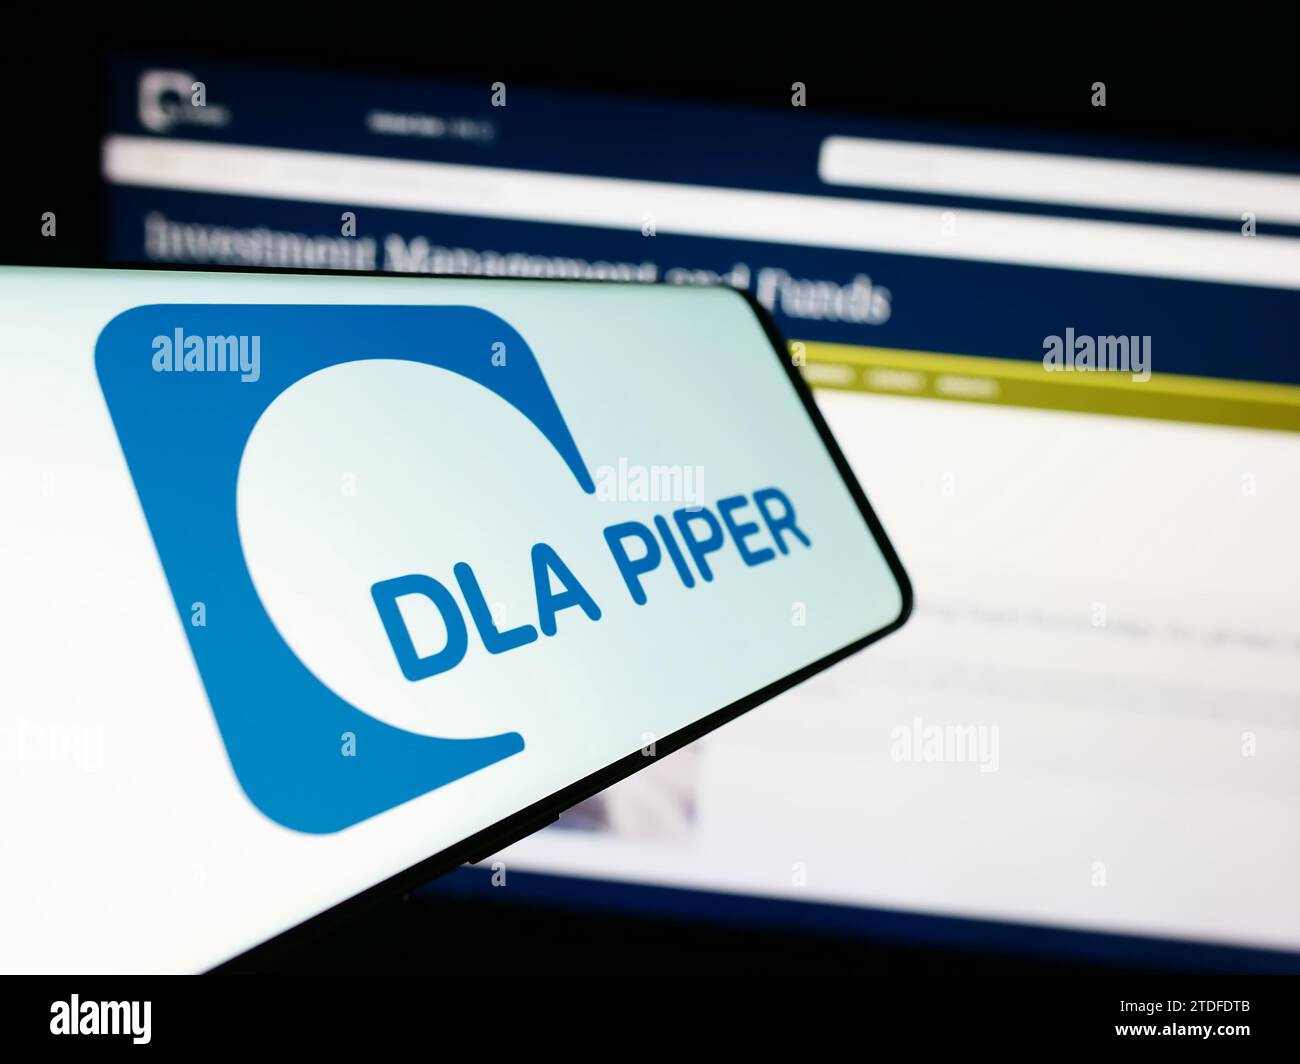 Cellphone with logo of law firm DLA Piper in front of business website. Focus on center of phone display. Stock Photo